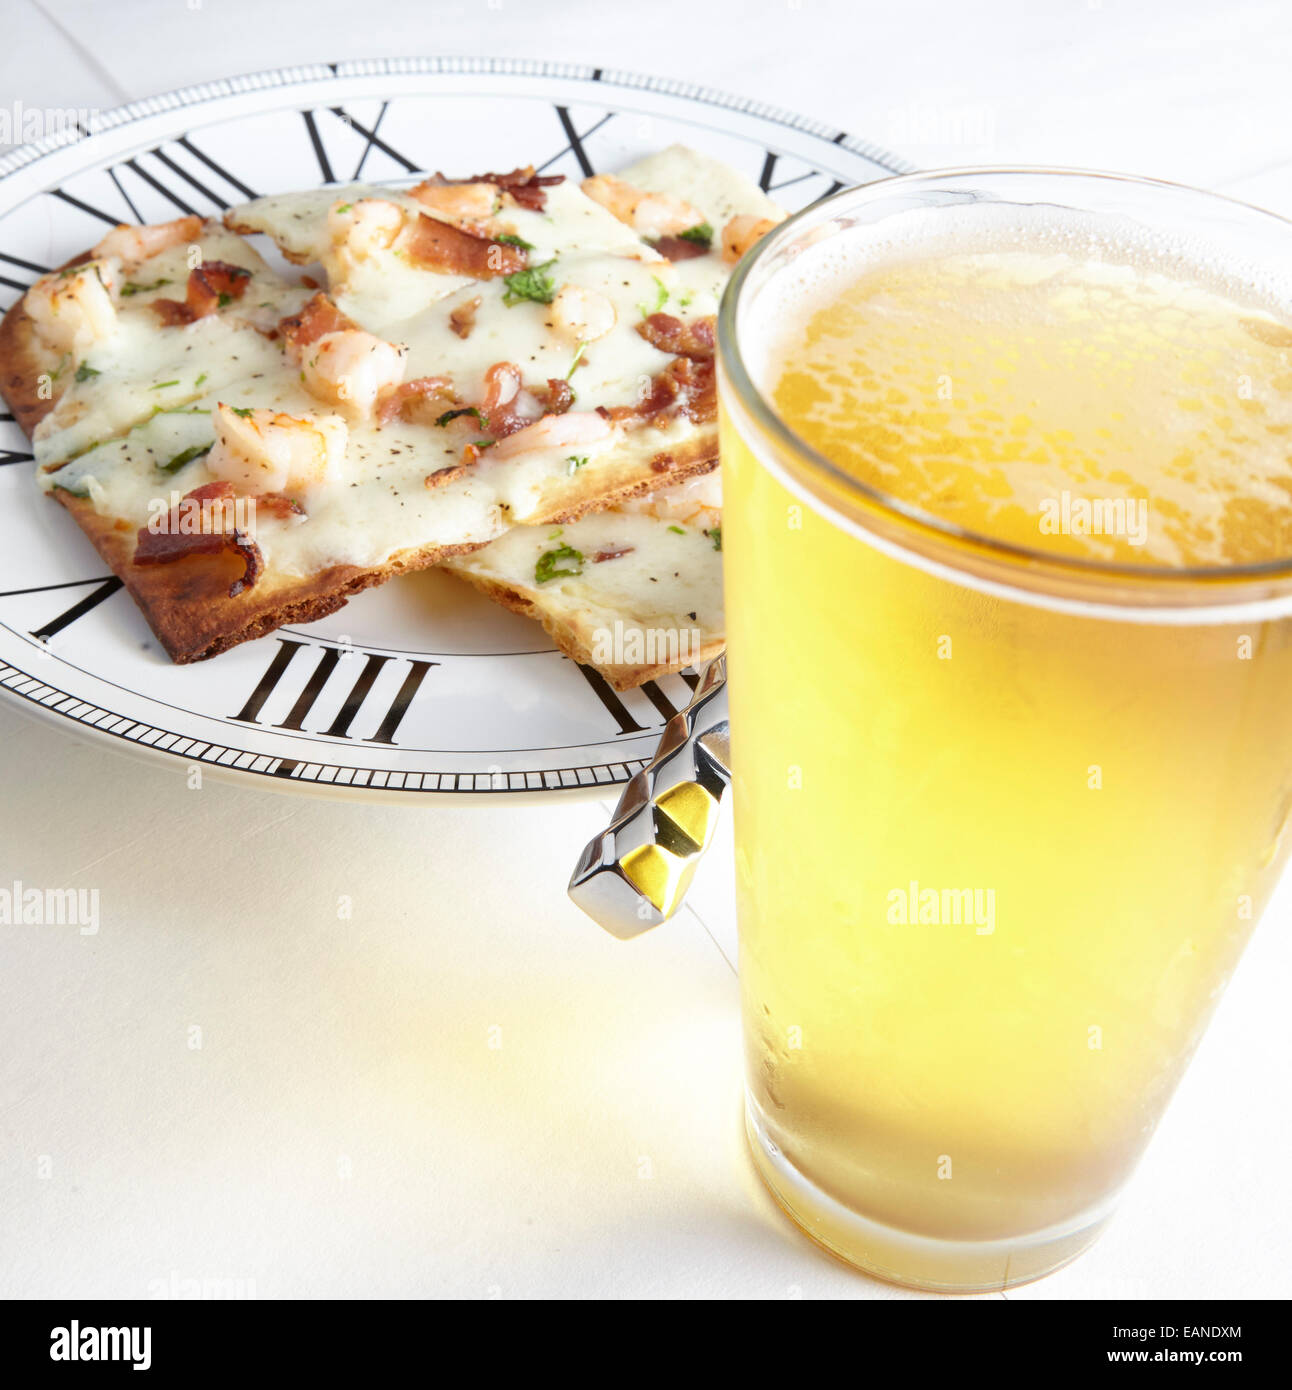 Shrimp flatbread with cilantro white cheddar Parmesan bacon with glass of cold beer Stock Photo